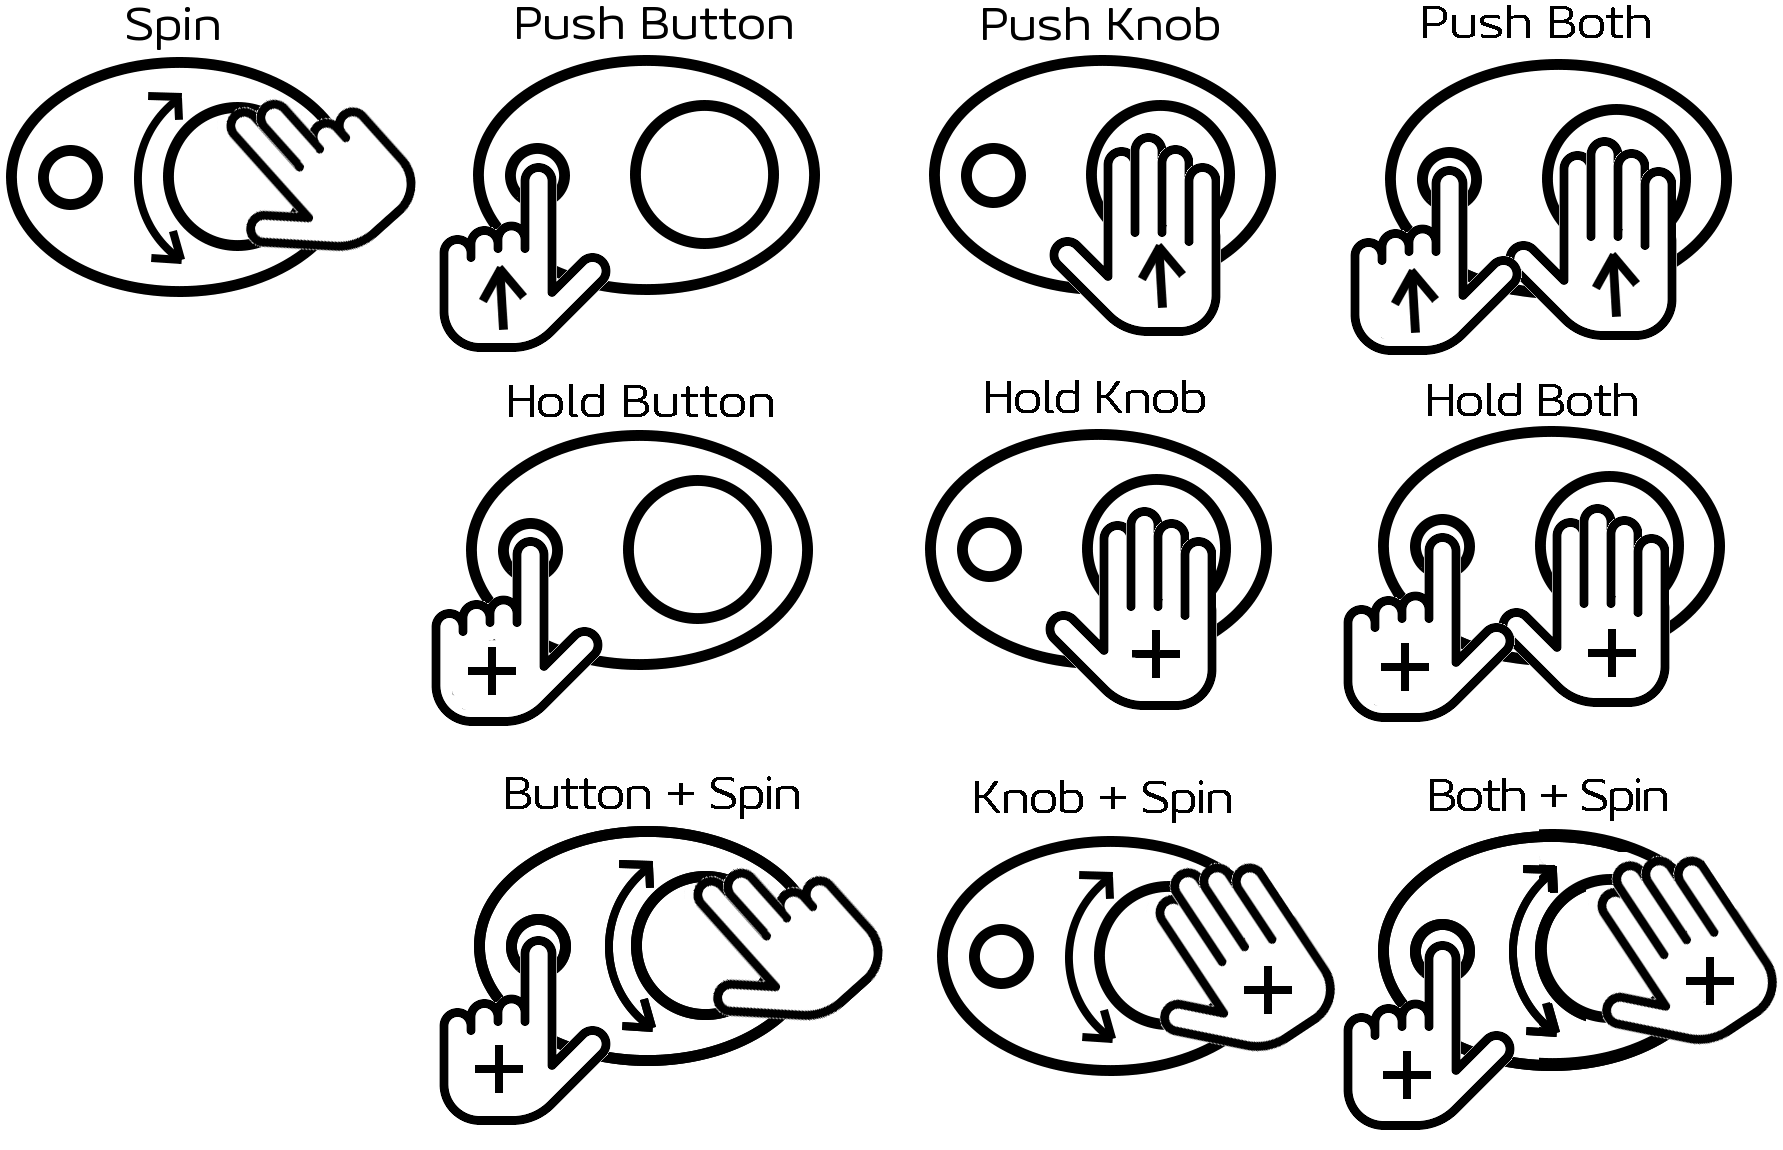 8 possible actions spin involving, push button, and push knob